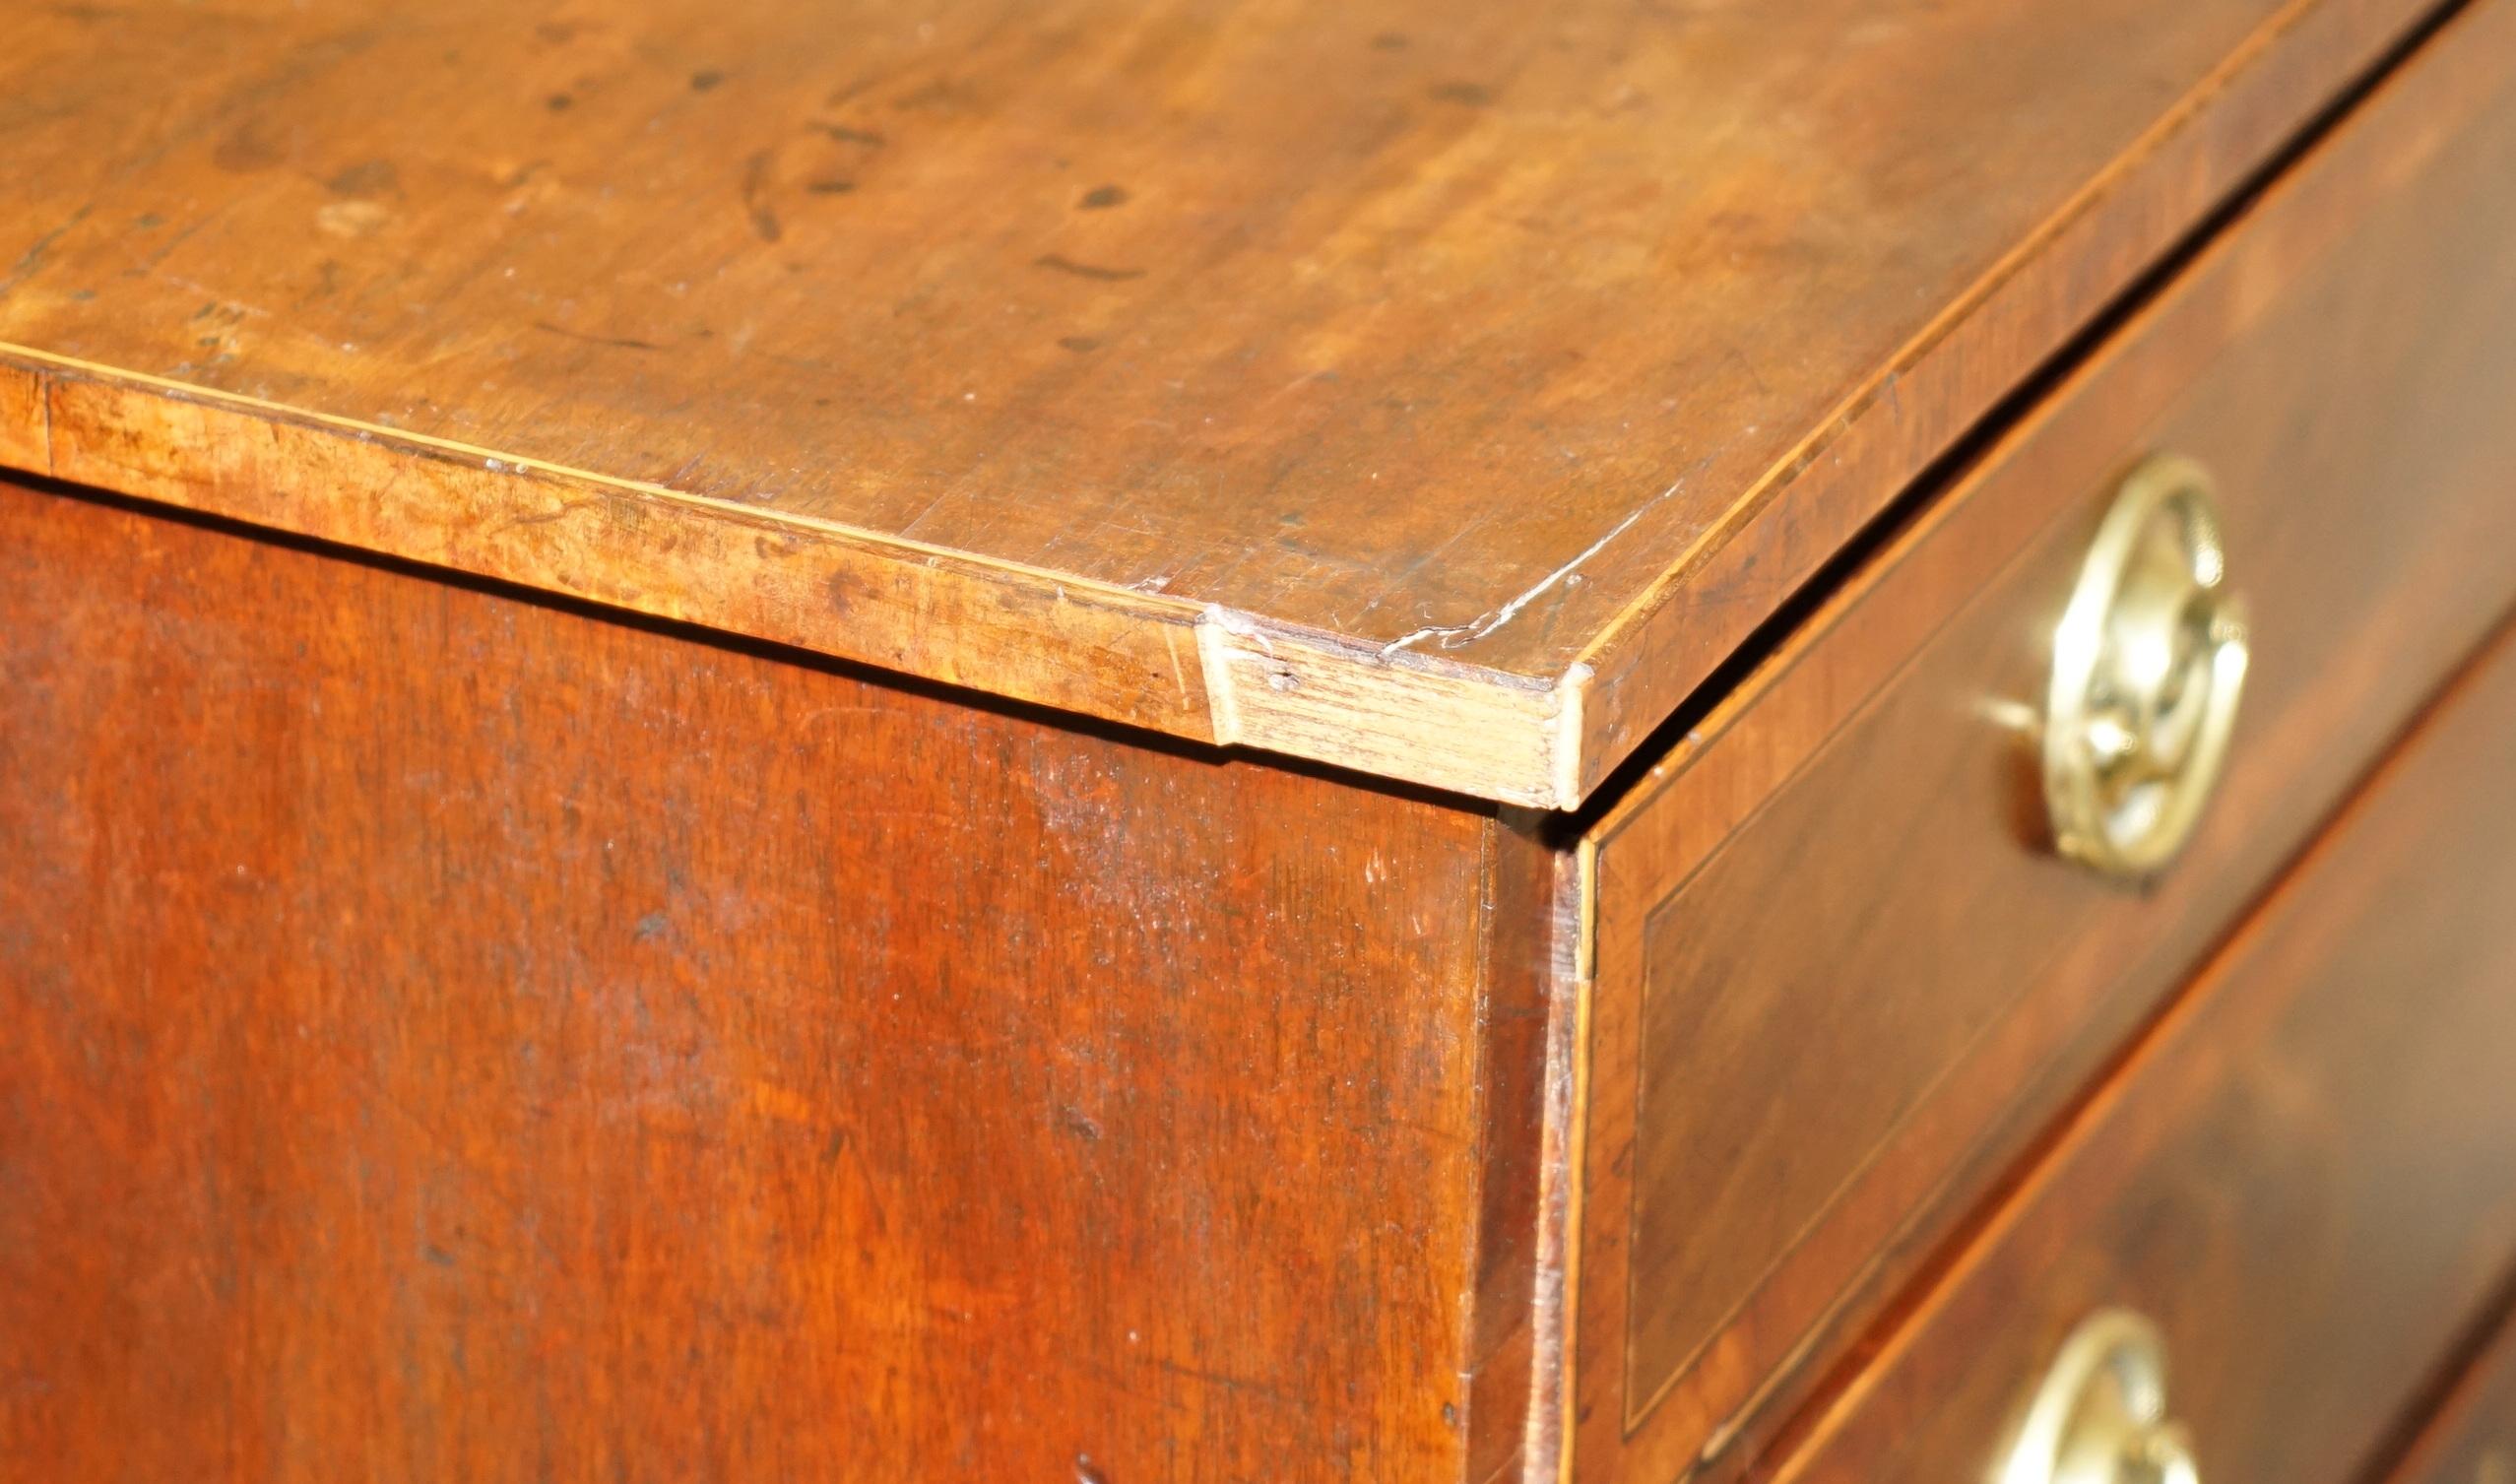 ANTiQUE GEORGE III BACHELORS CHEST OF DRAWERS ATTRIBUTED TO GILLOWS OF LANCASTER im Angebot 6